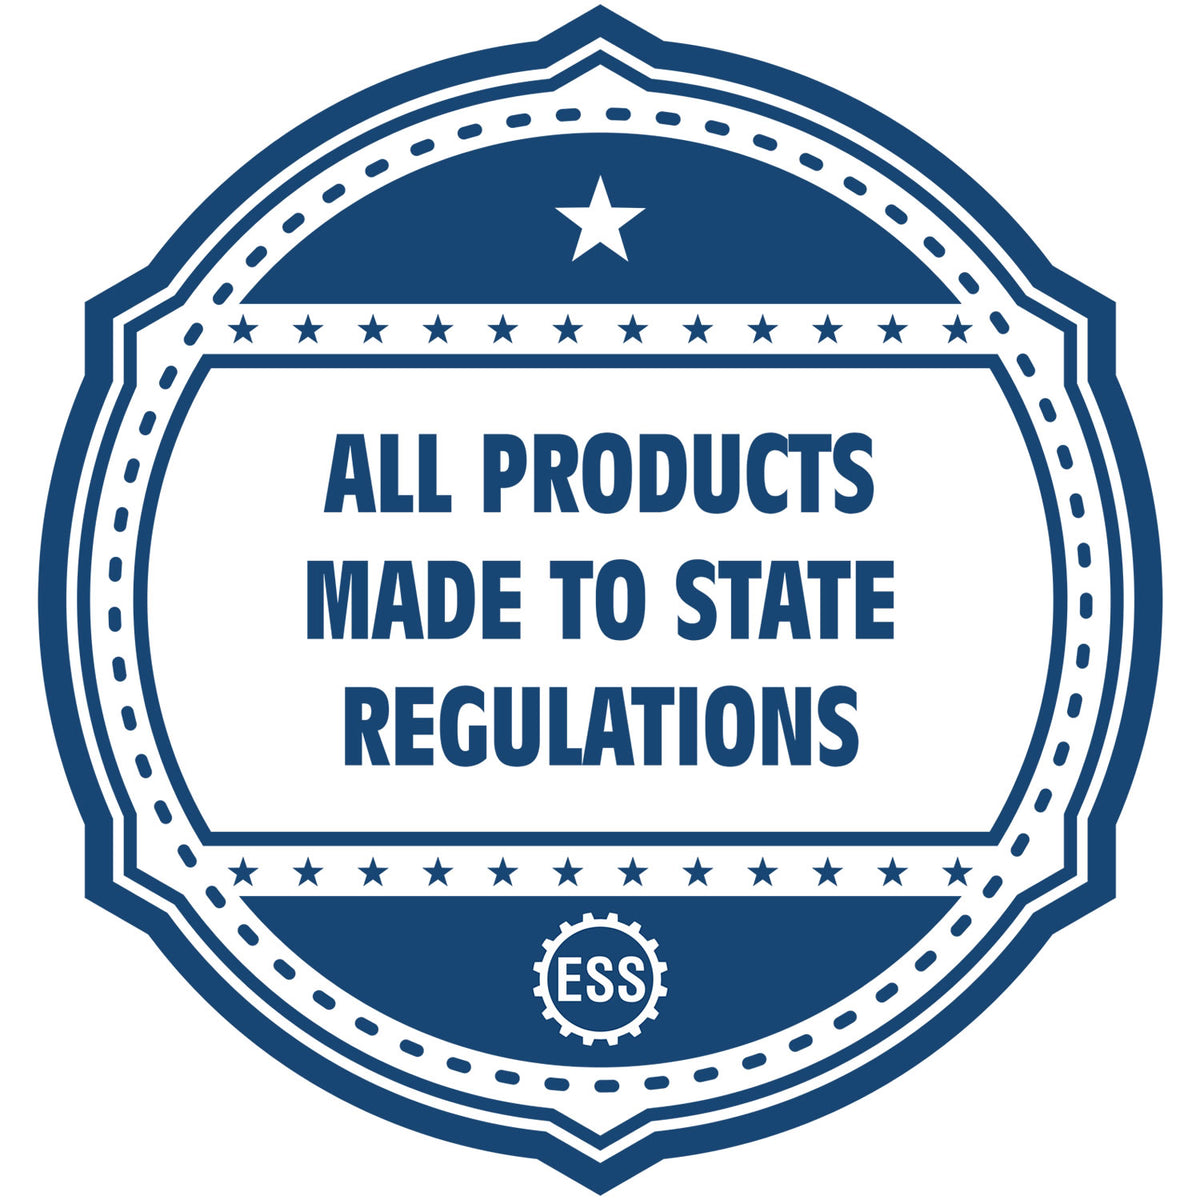 An icon or badge element for the Slim Pre-Inked Hawaii Landscape Architect Seal Stamp showing that this product is made in compliance with state regulations.